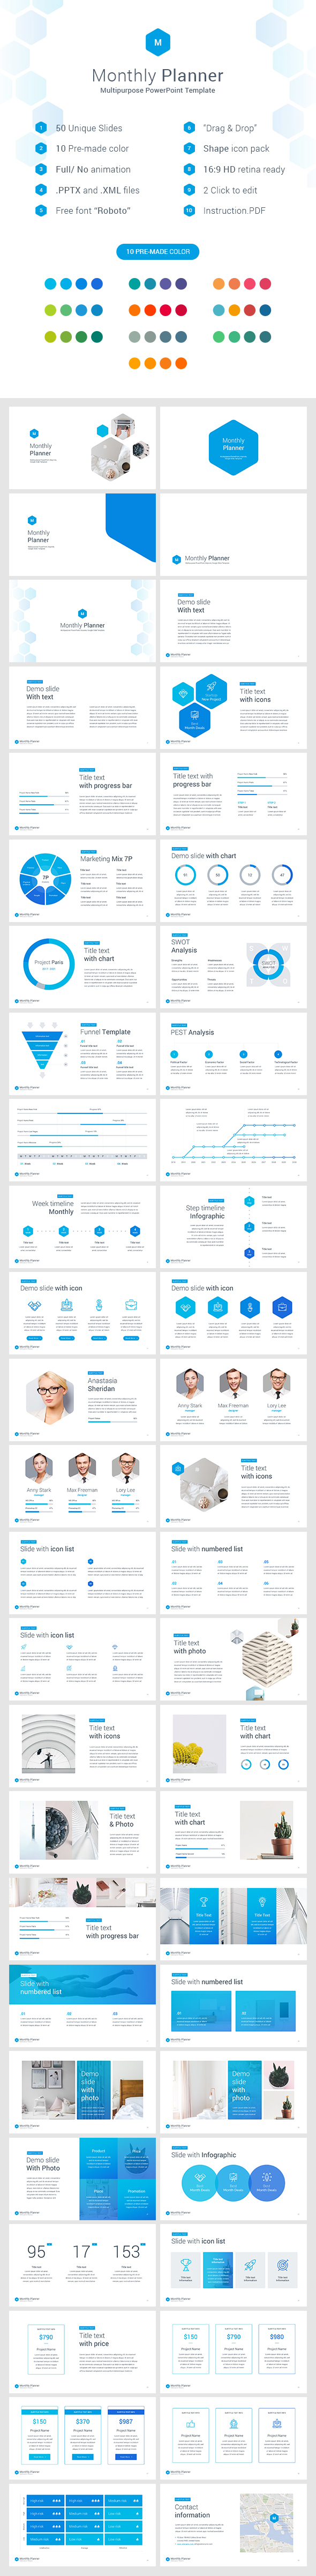 Monthly Planner PowerPoint Template